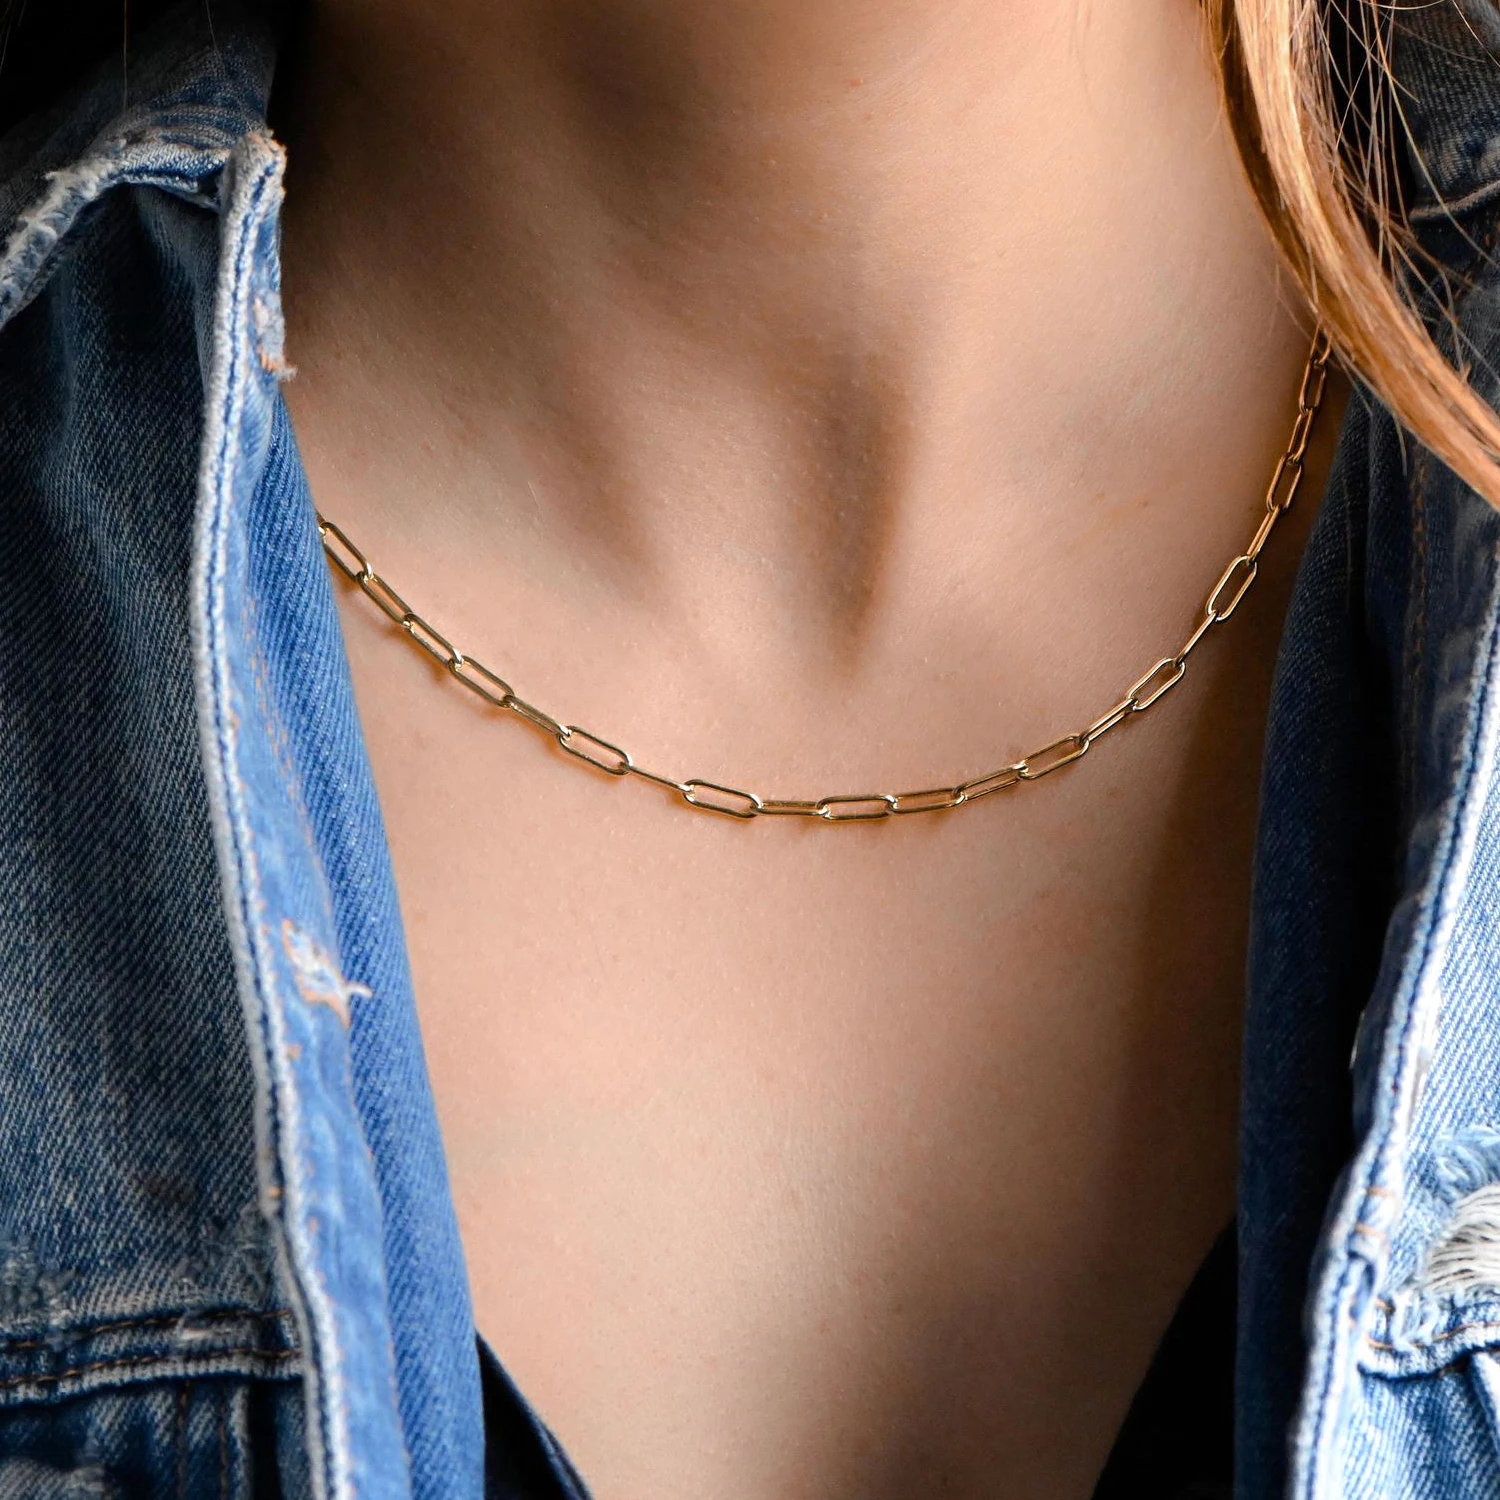 

2020 High Quality 14k Gold Filled Stainless Steel Paperclip Chain Necklace Choker Layering Necklace